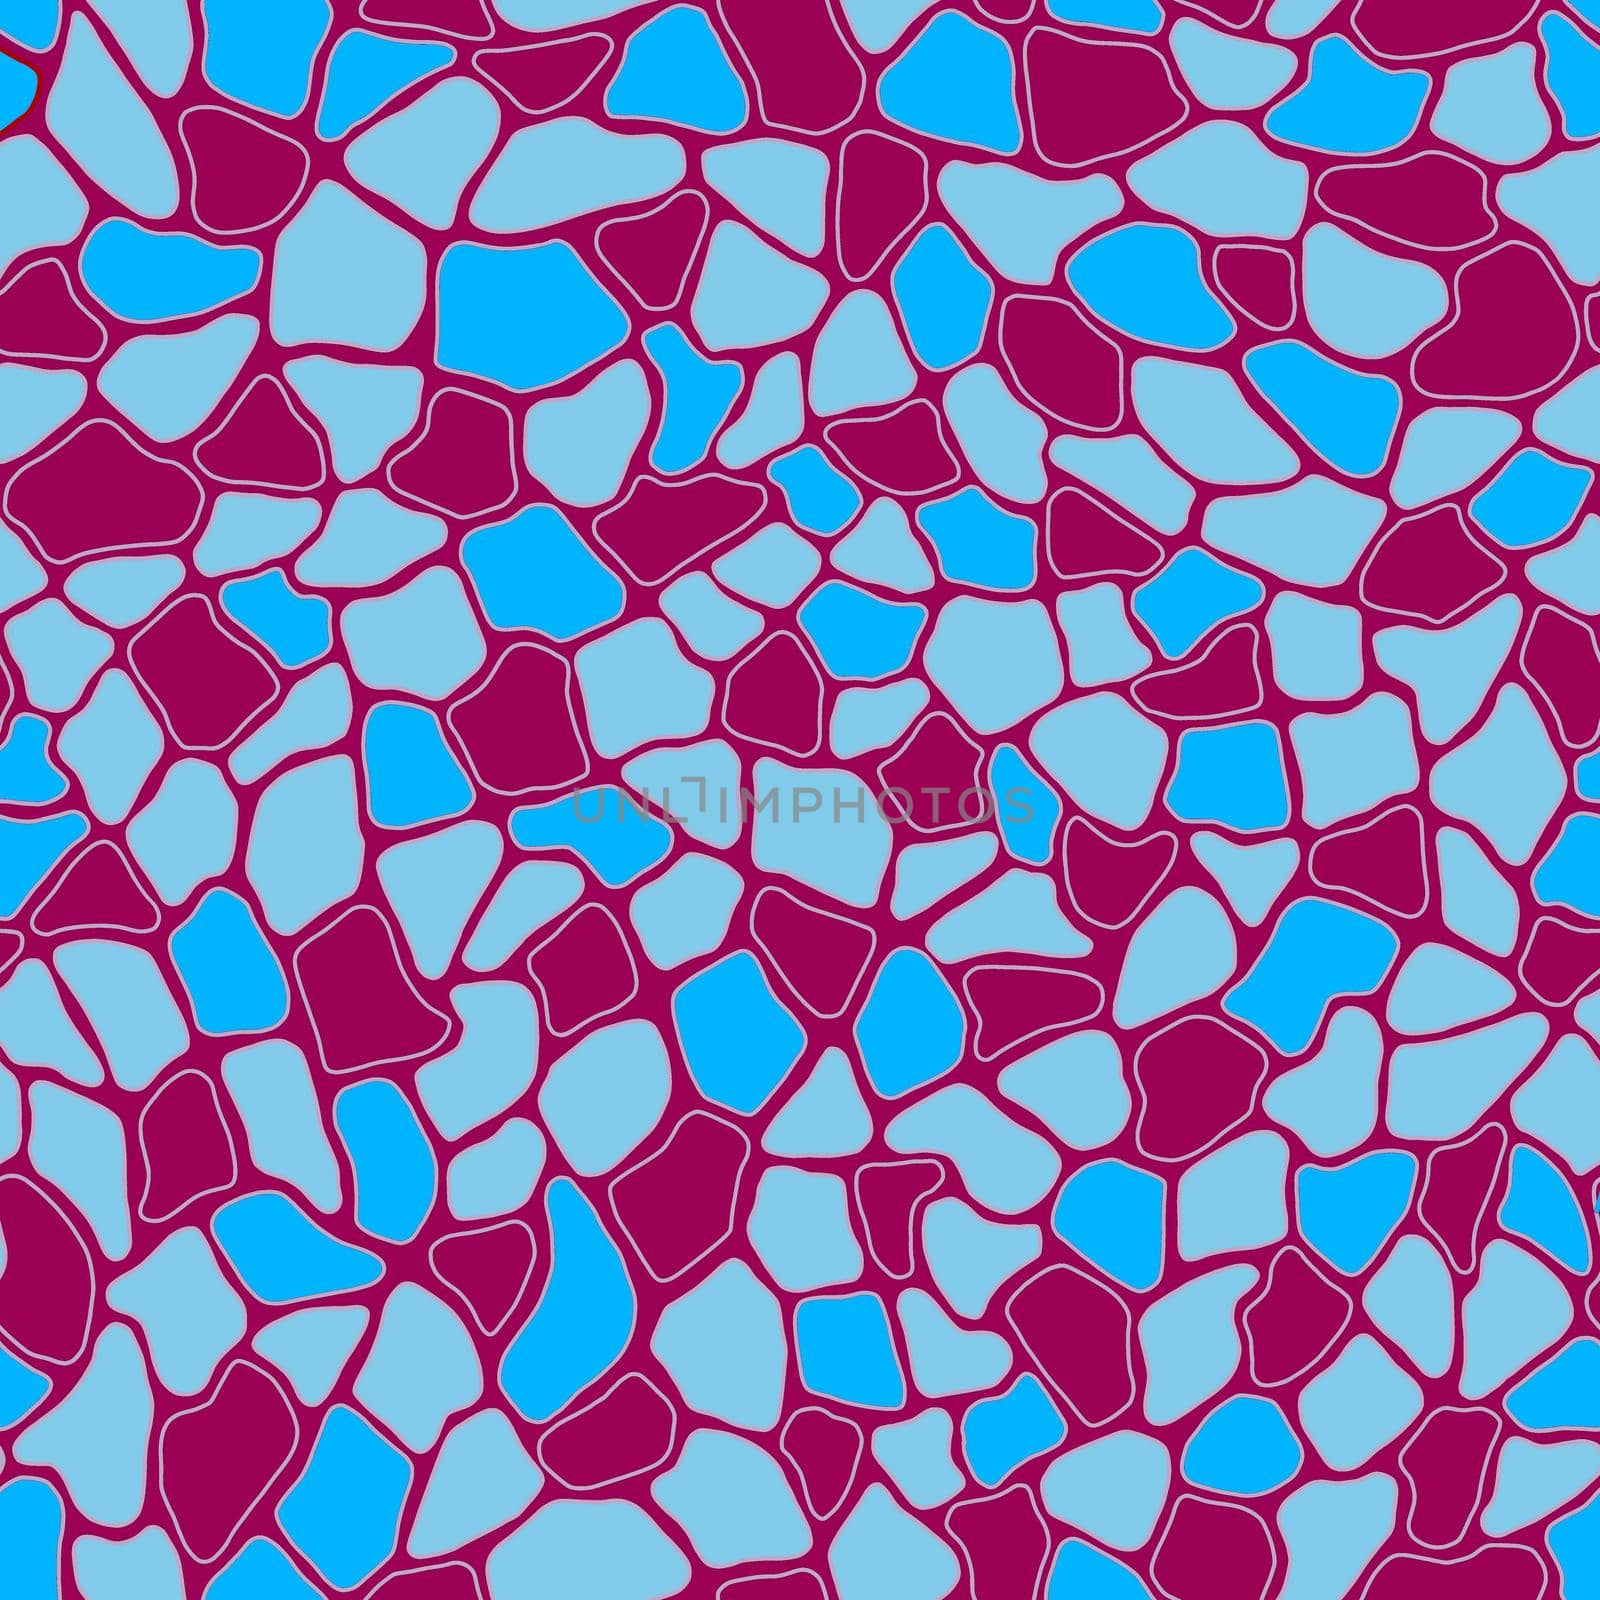 Terrazzo modern trendy colorful seamless pattern.Abstract creative backdrop with chaotic small pieces irregular shapes. Ideal for wrapping paper,textile,print,wallpaper,terrazzo flooring.Pink azure.